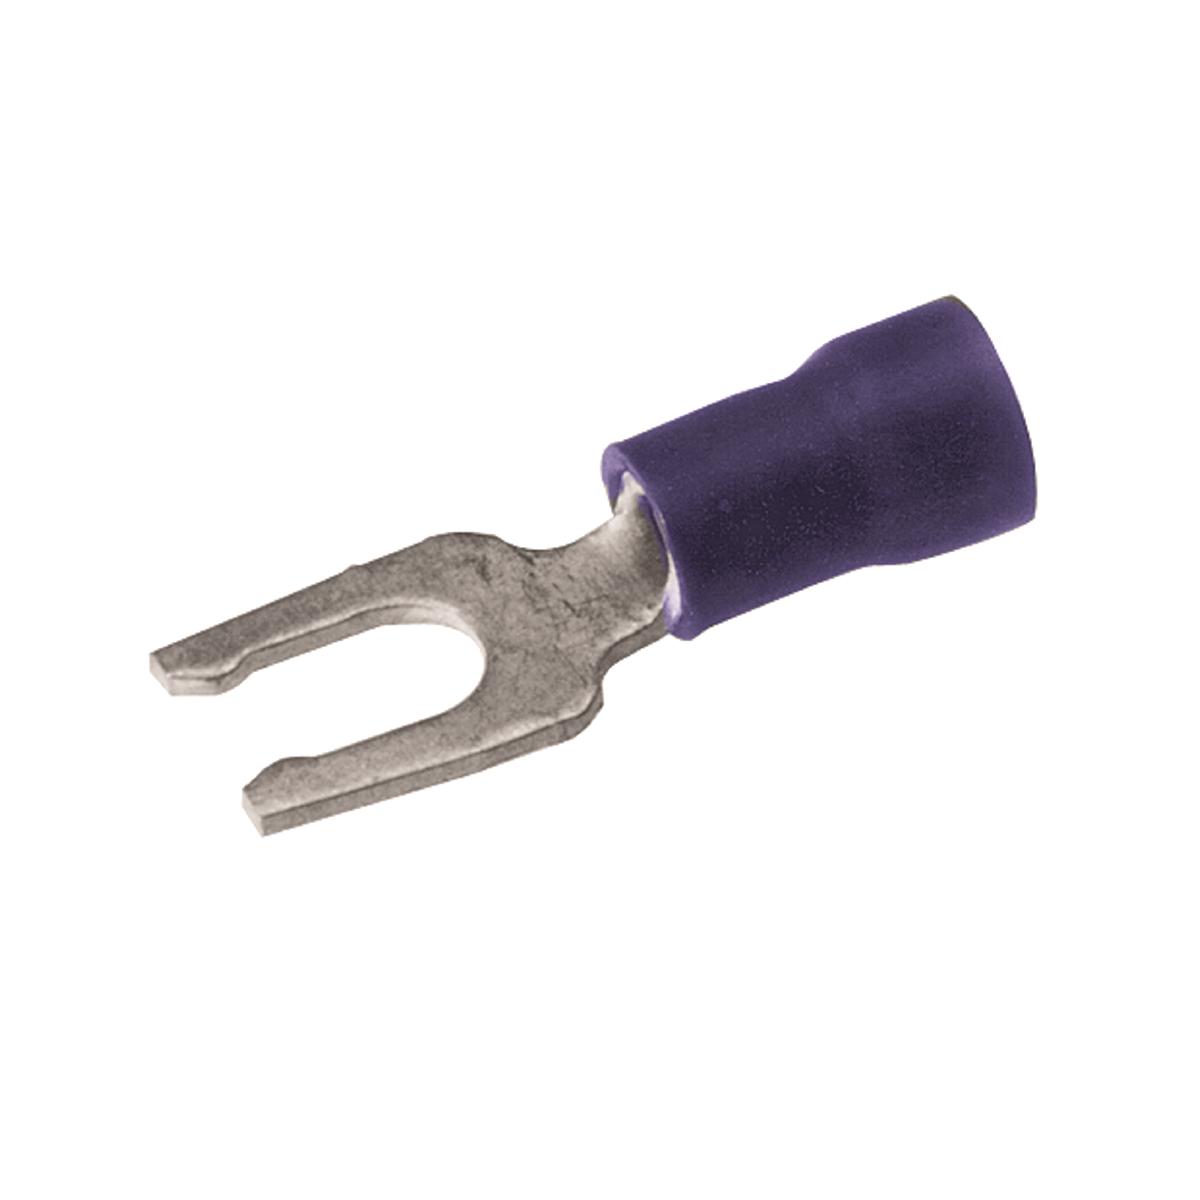 Hubbell BA14EL8 Vinyl Locking Fork Terminal For 16 - 14 AWG.  ; Features: Locking Fork Tongue Design: Allows Fast Installation-Screw Only Has To Be Loosened For Termination, Internal Configuration Of The Fork: Prevents The Terminal From Coming Off The Screw Without Apply